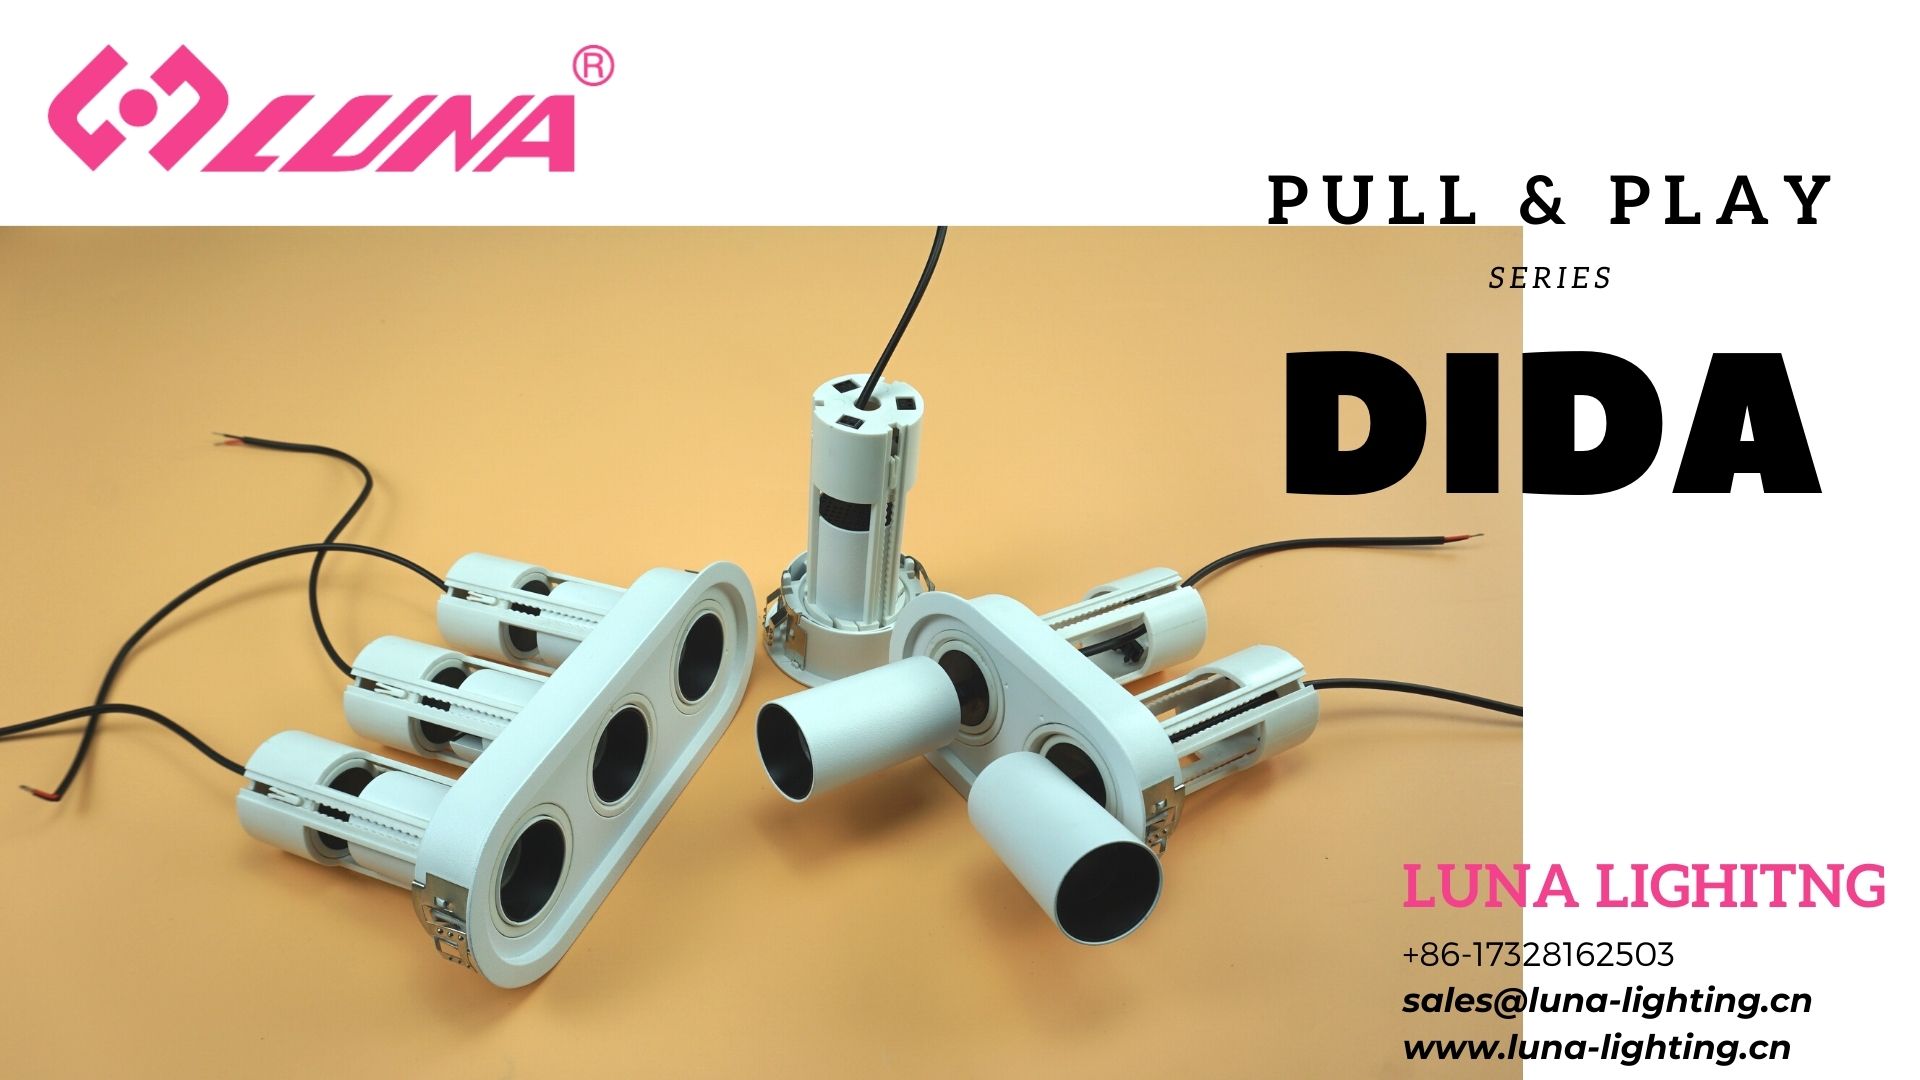 LUNA Pull & Play Series - DIDA Product Video